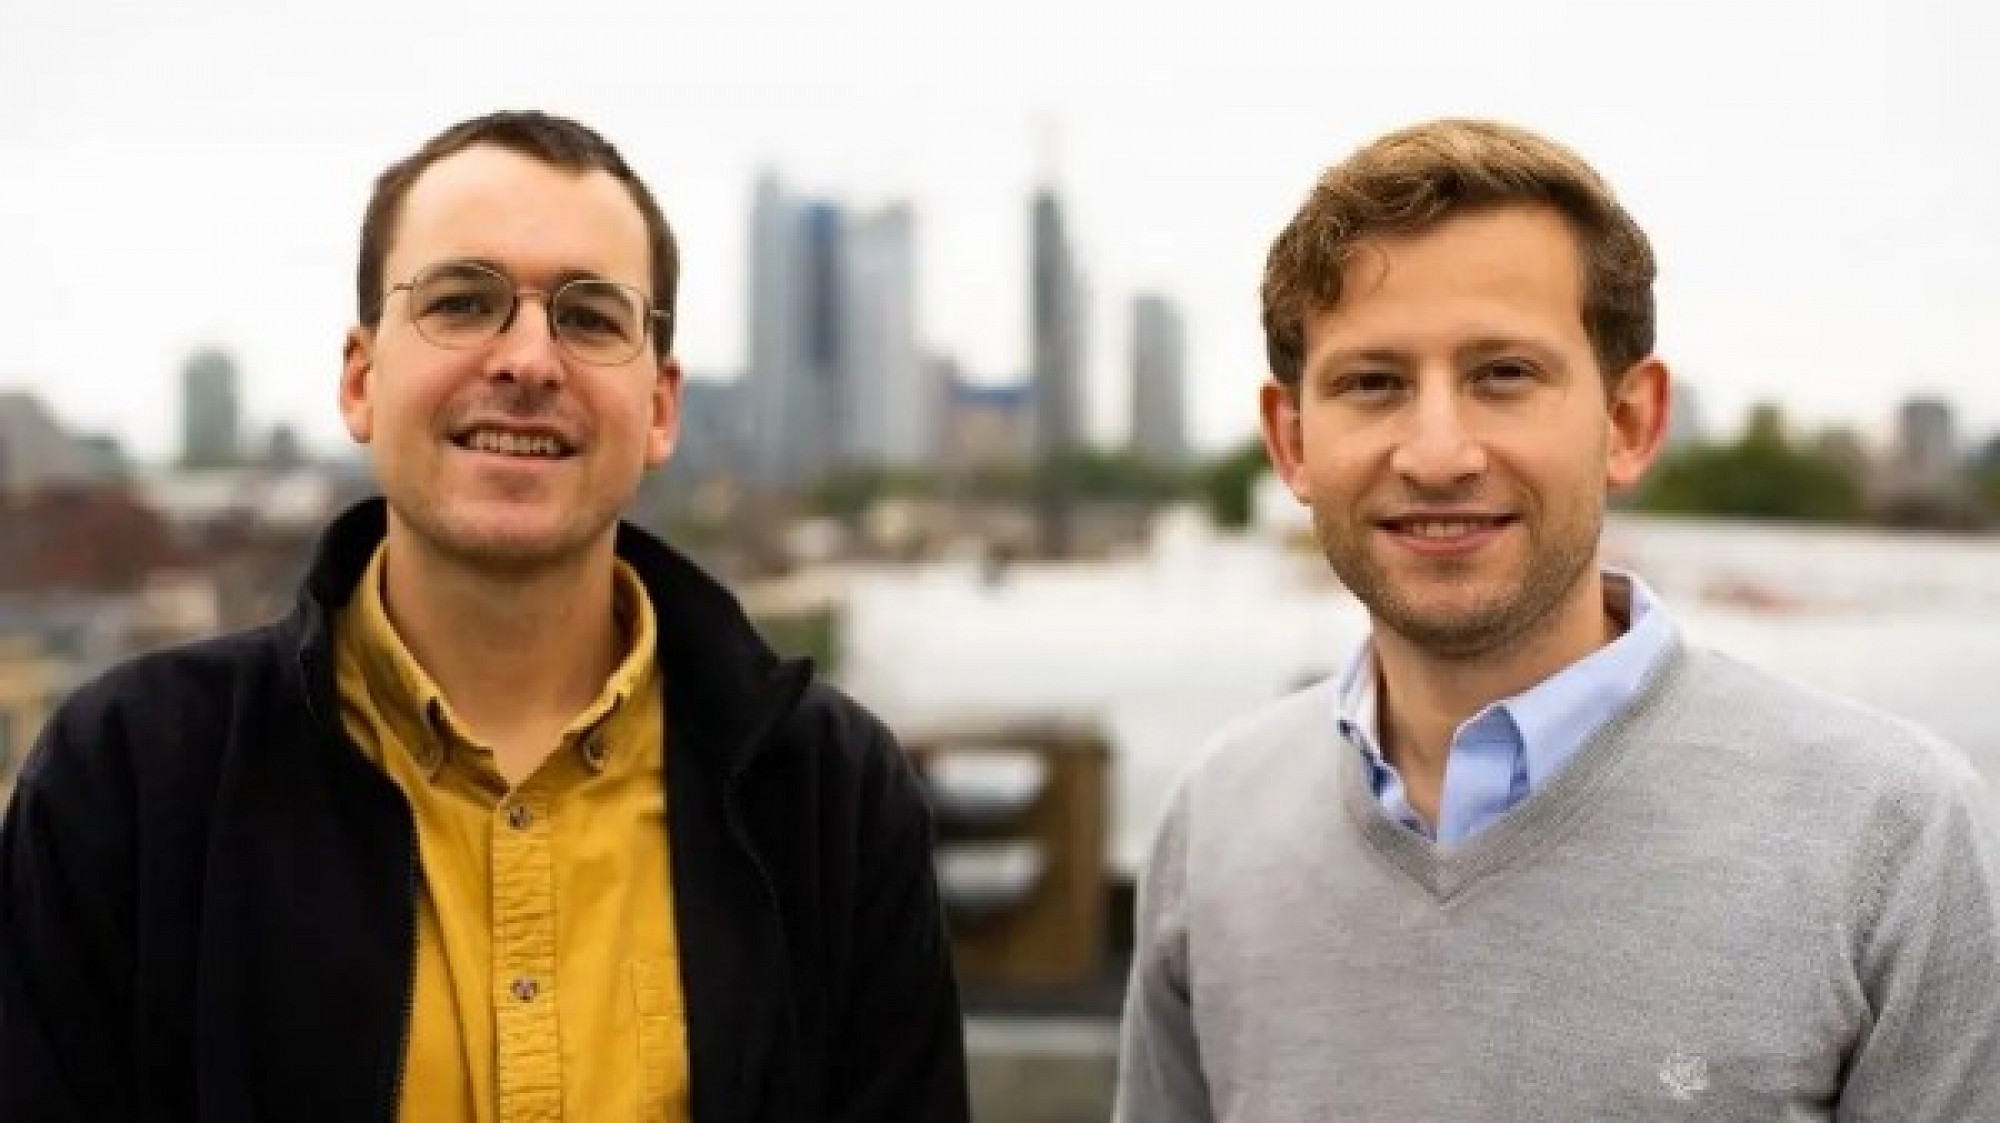 London-based Lindus Health wants to enable next-gen healthcare; secures $5M funding to scaleup